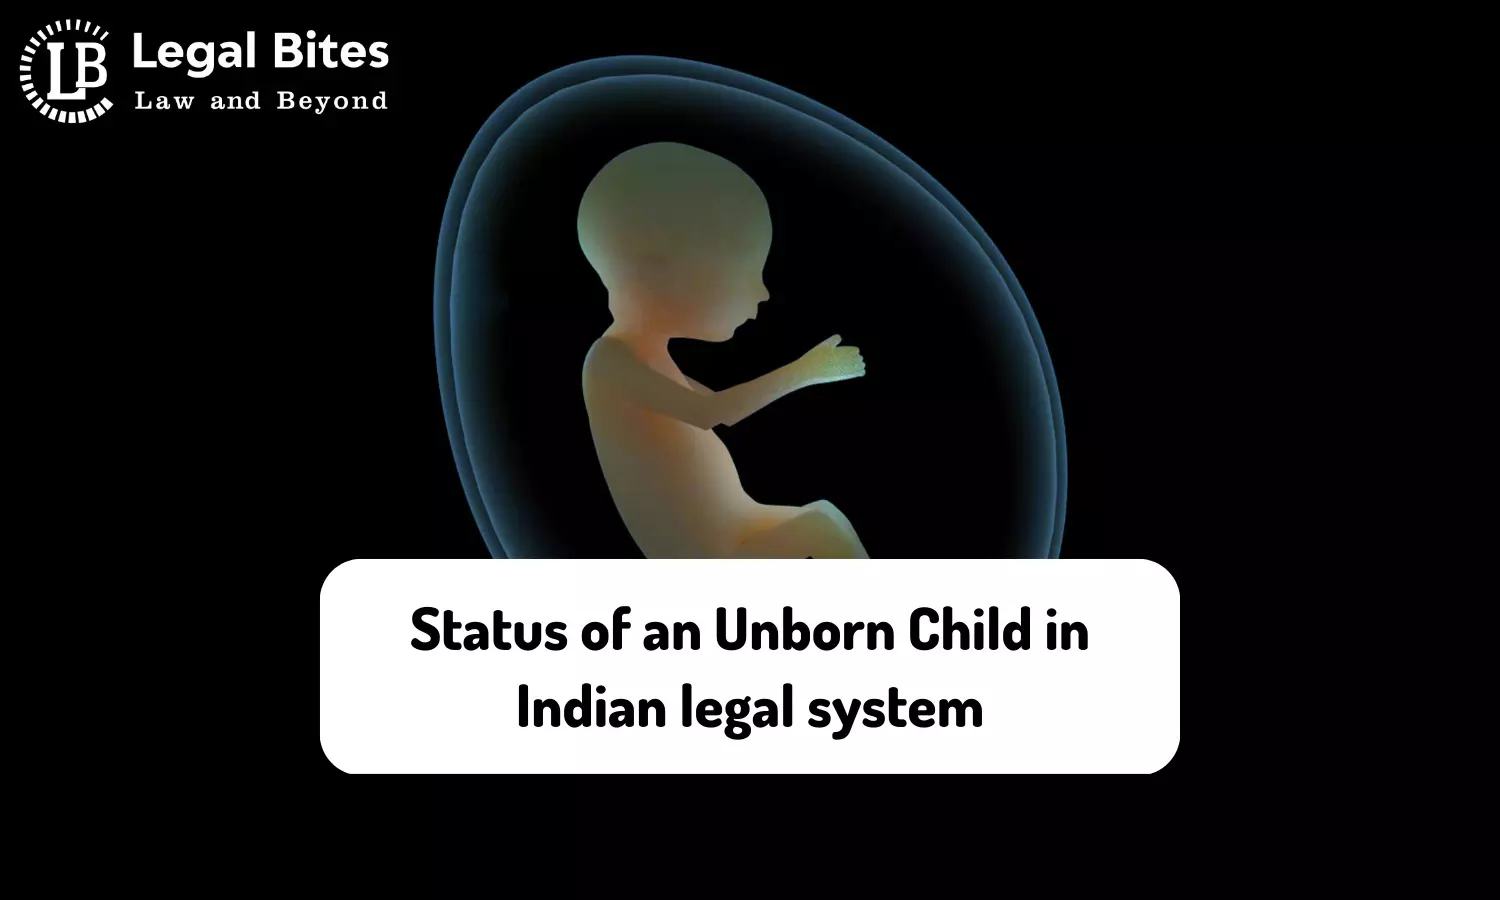 Status of an Unborn Child in the Indian Legal System